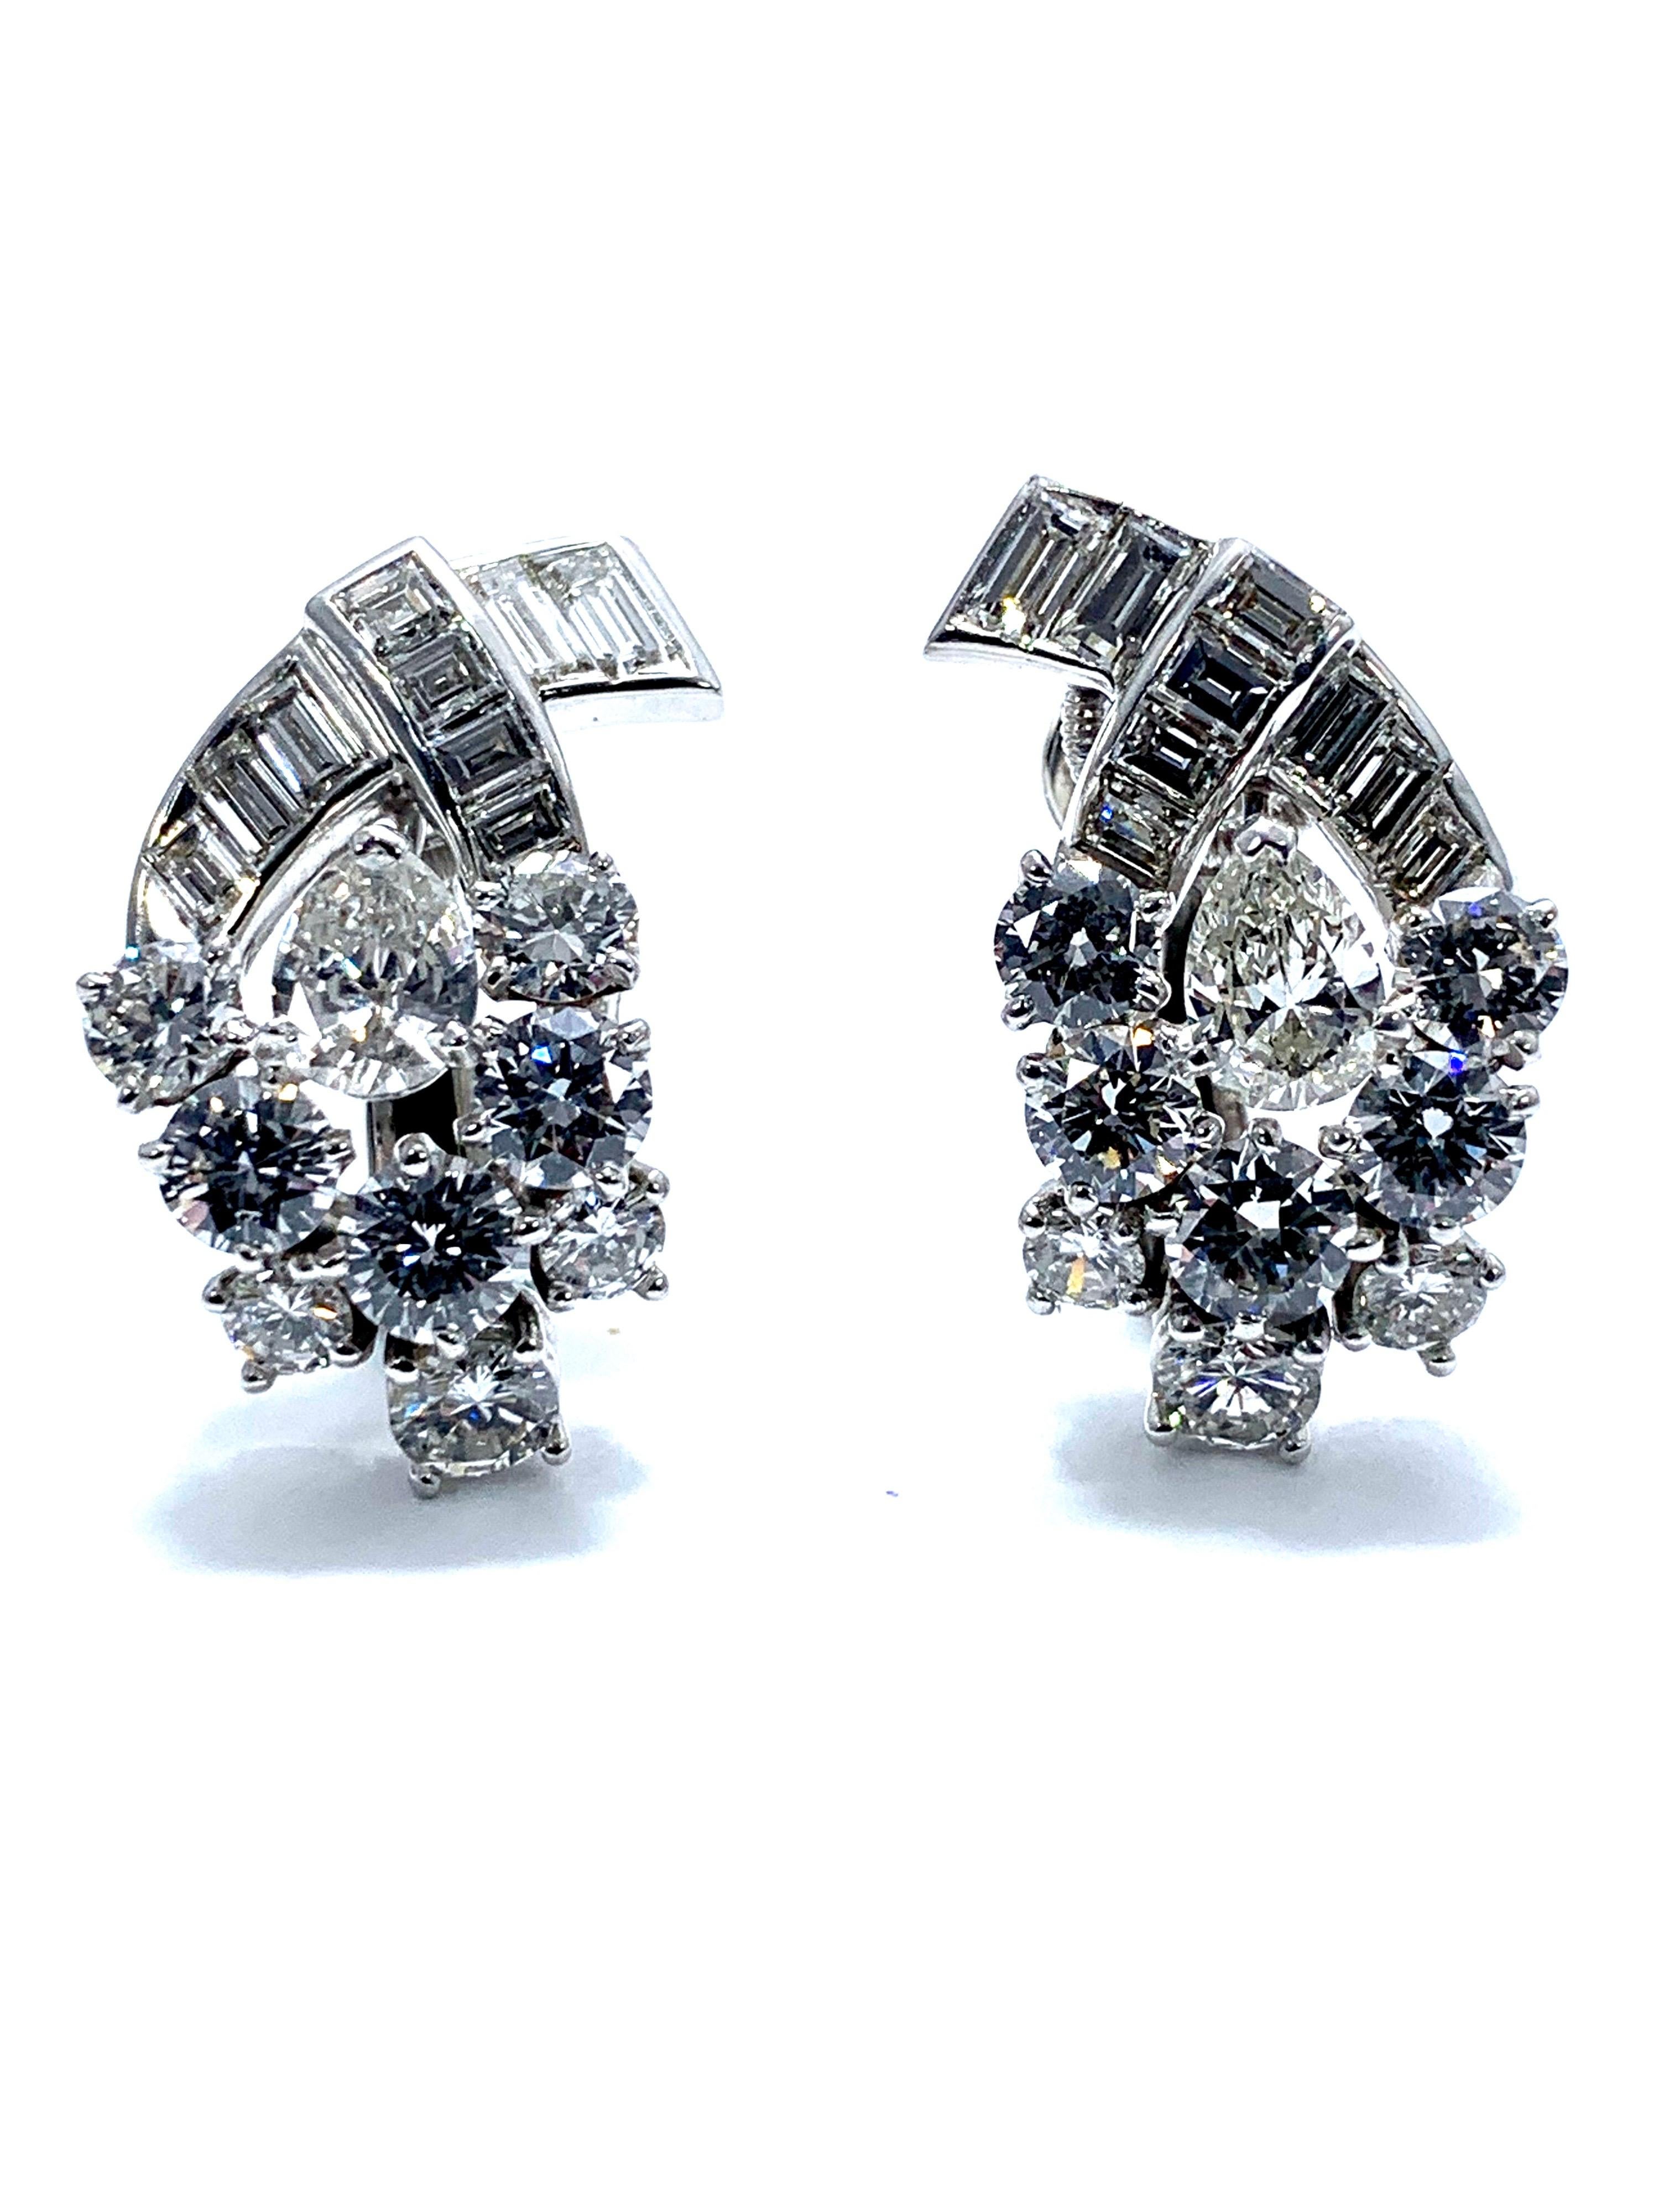 A gorgeous pair of various shaped Diamond and platinum clip earrings.  The 5.32 carats in Diamonds consist of round brilliants, pear shapes, and baguettes.  they are graded as G-H color, VS-SI1 clarity.    The earrings feature a hinged clip back, to